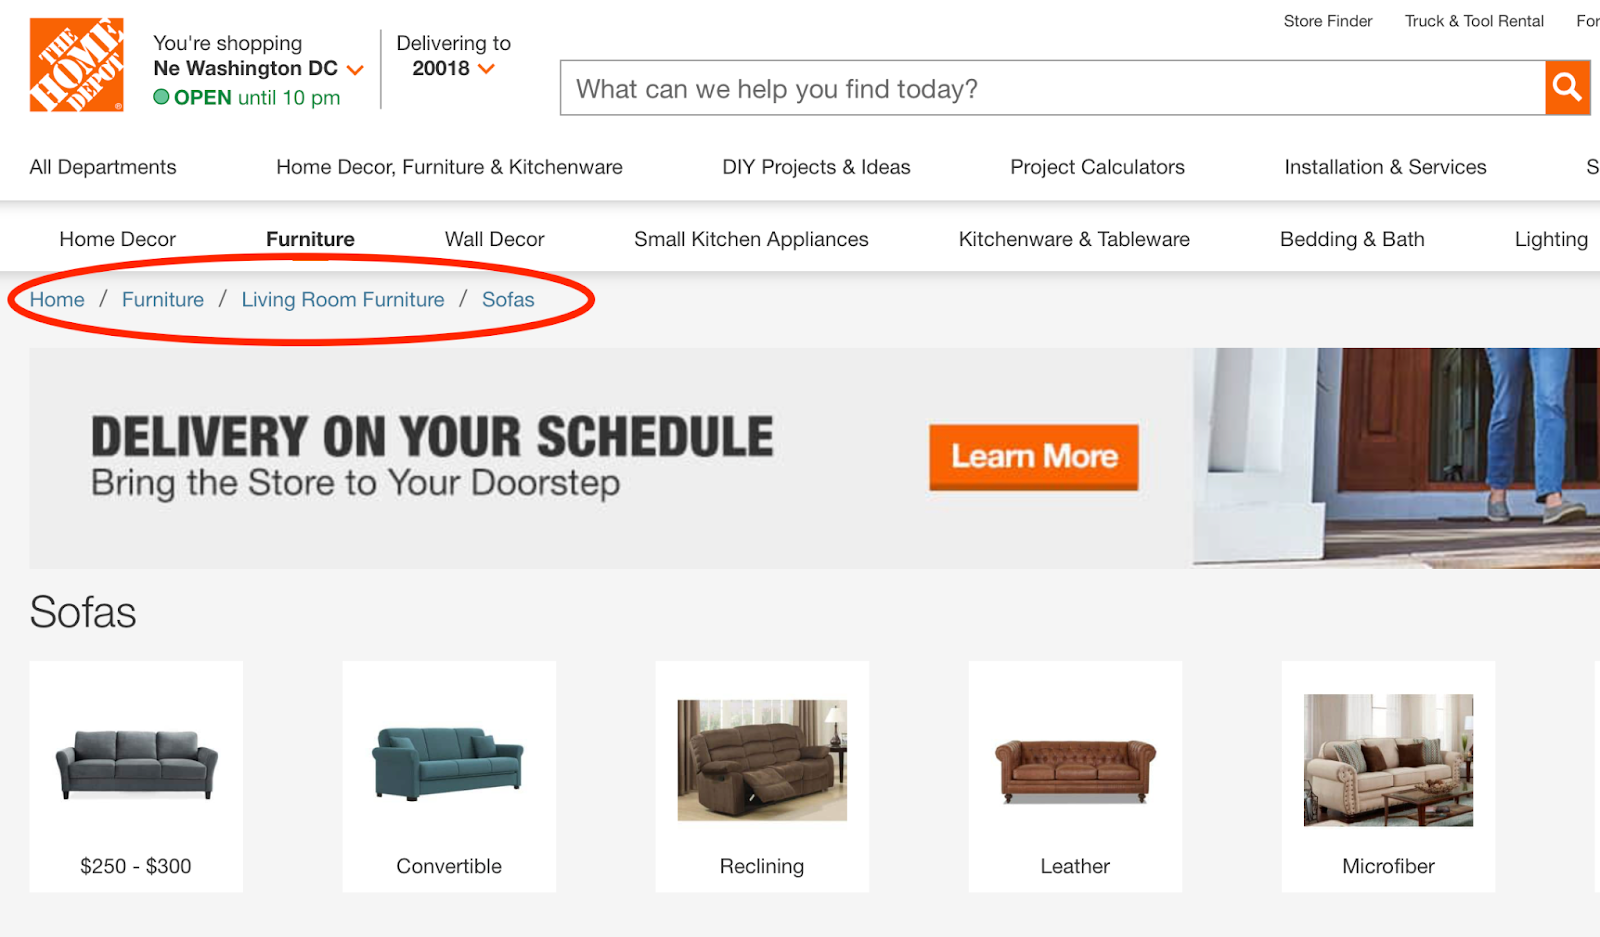 The Home Depot web page uses the "breadcrumb trail" to show website architecture.